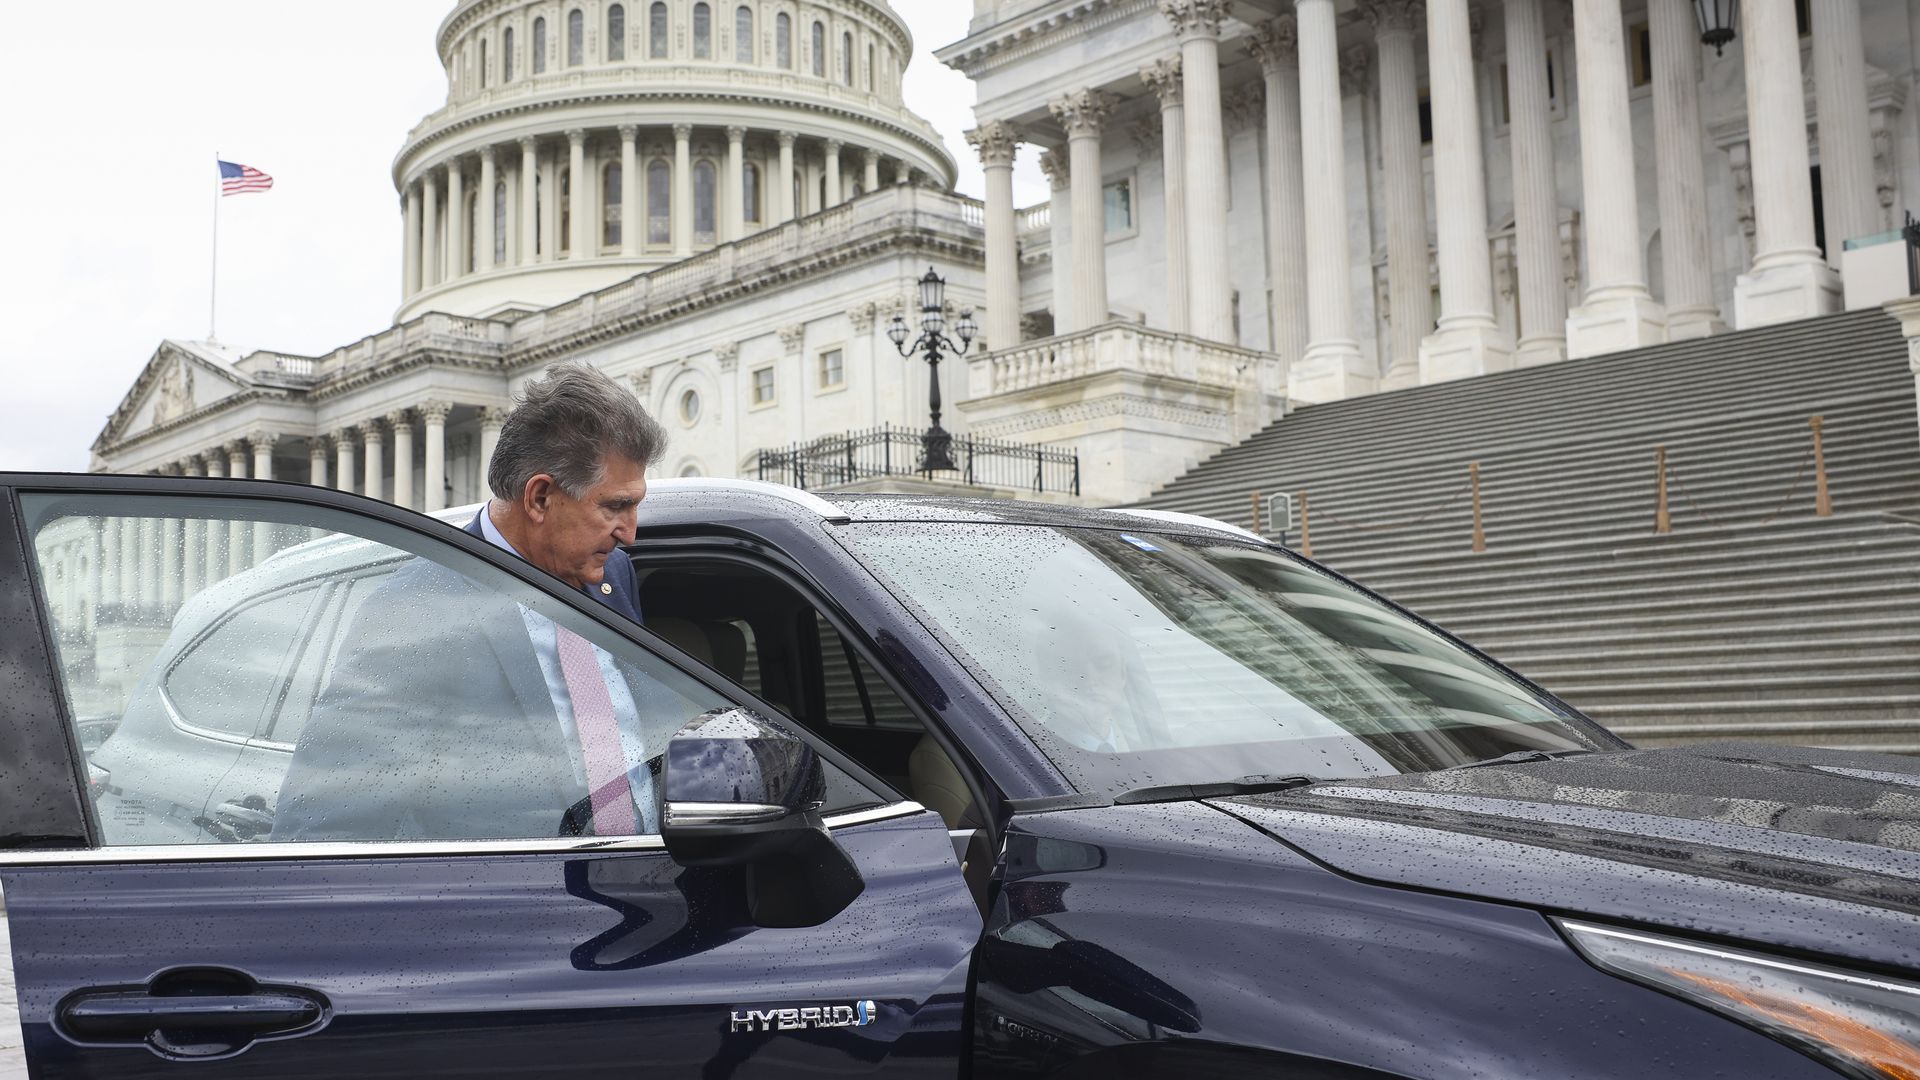 Sen. Joe Manchin is seen getting into a car for his drive to the White House on Wednesday.